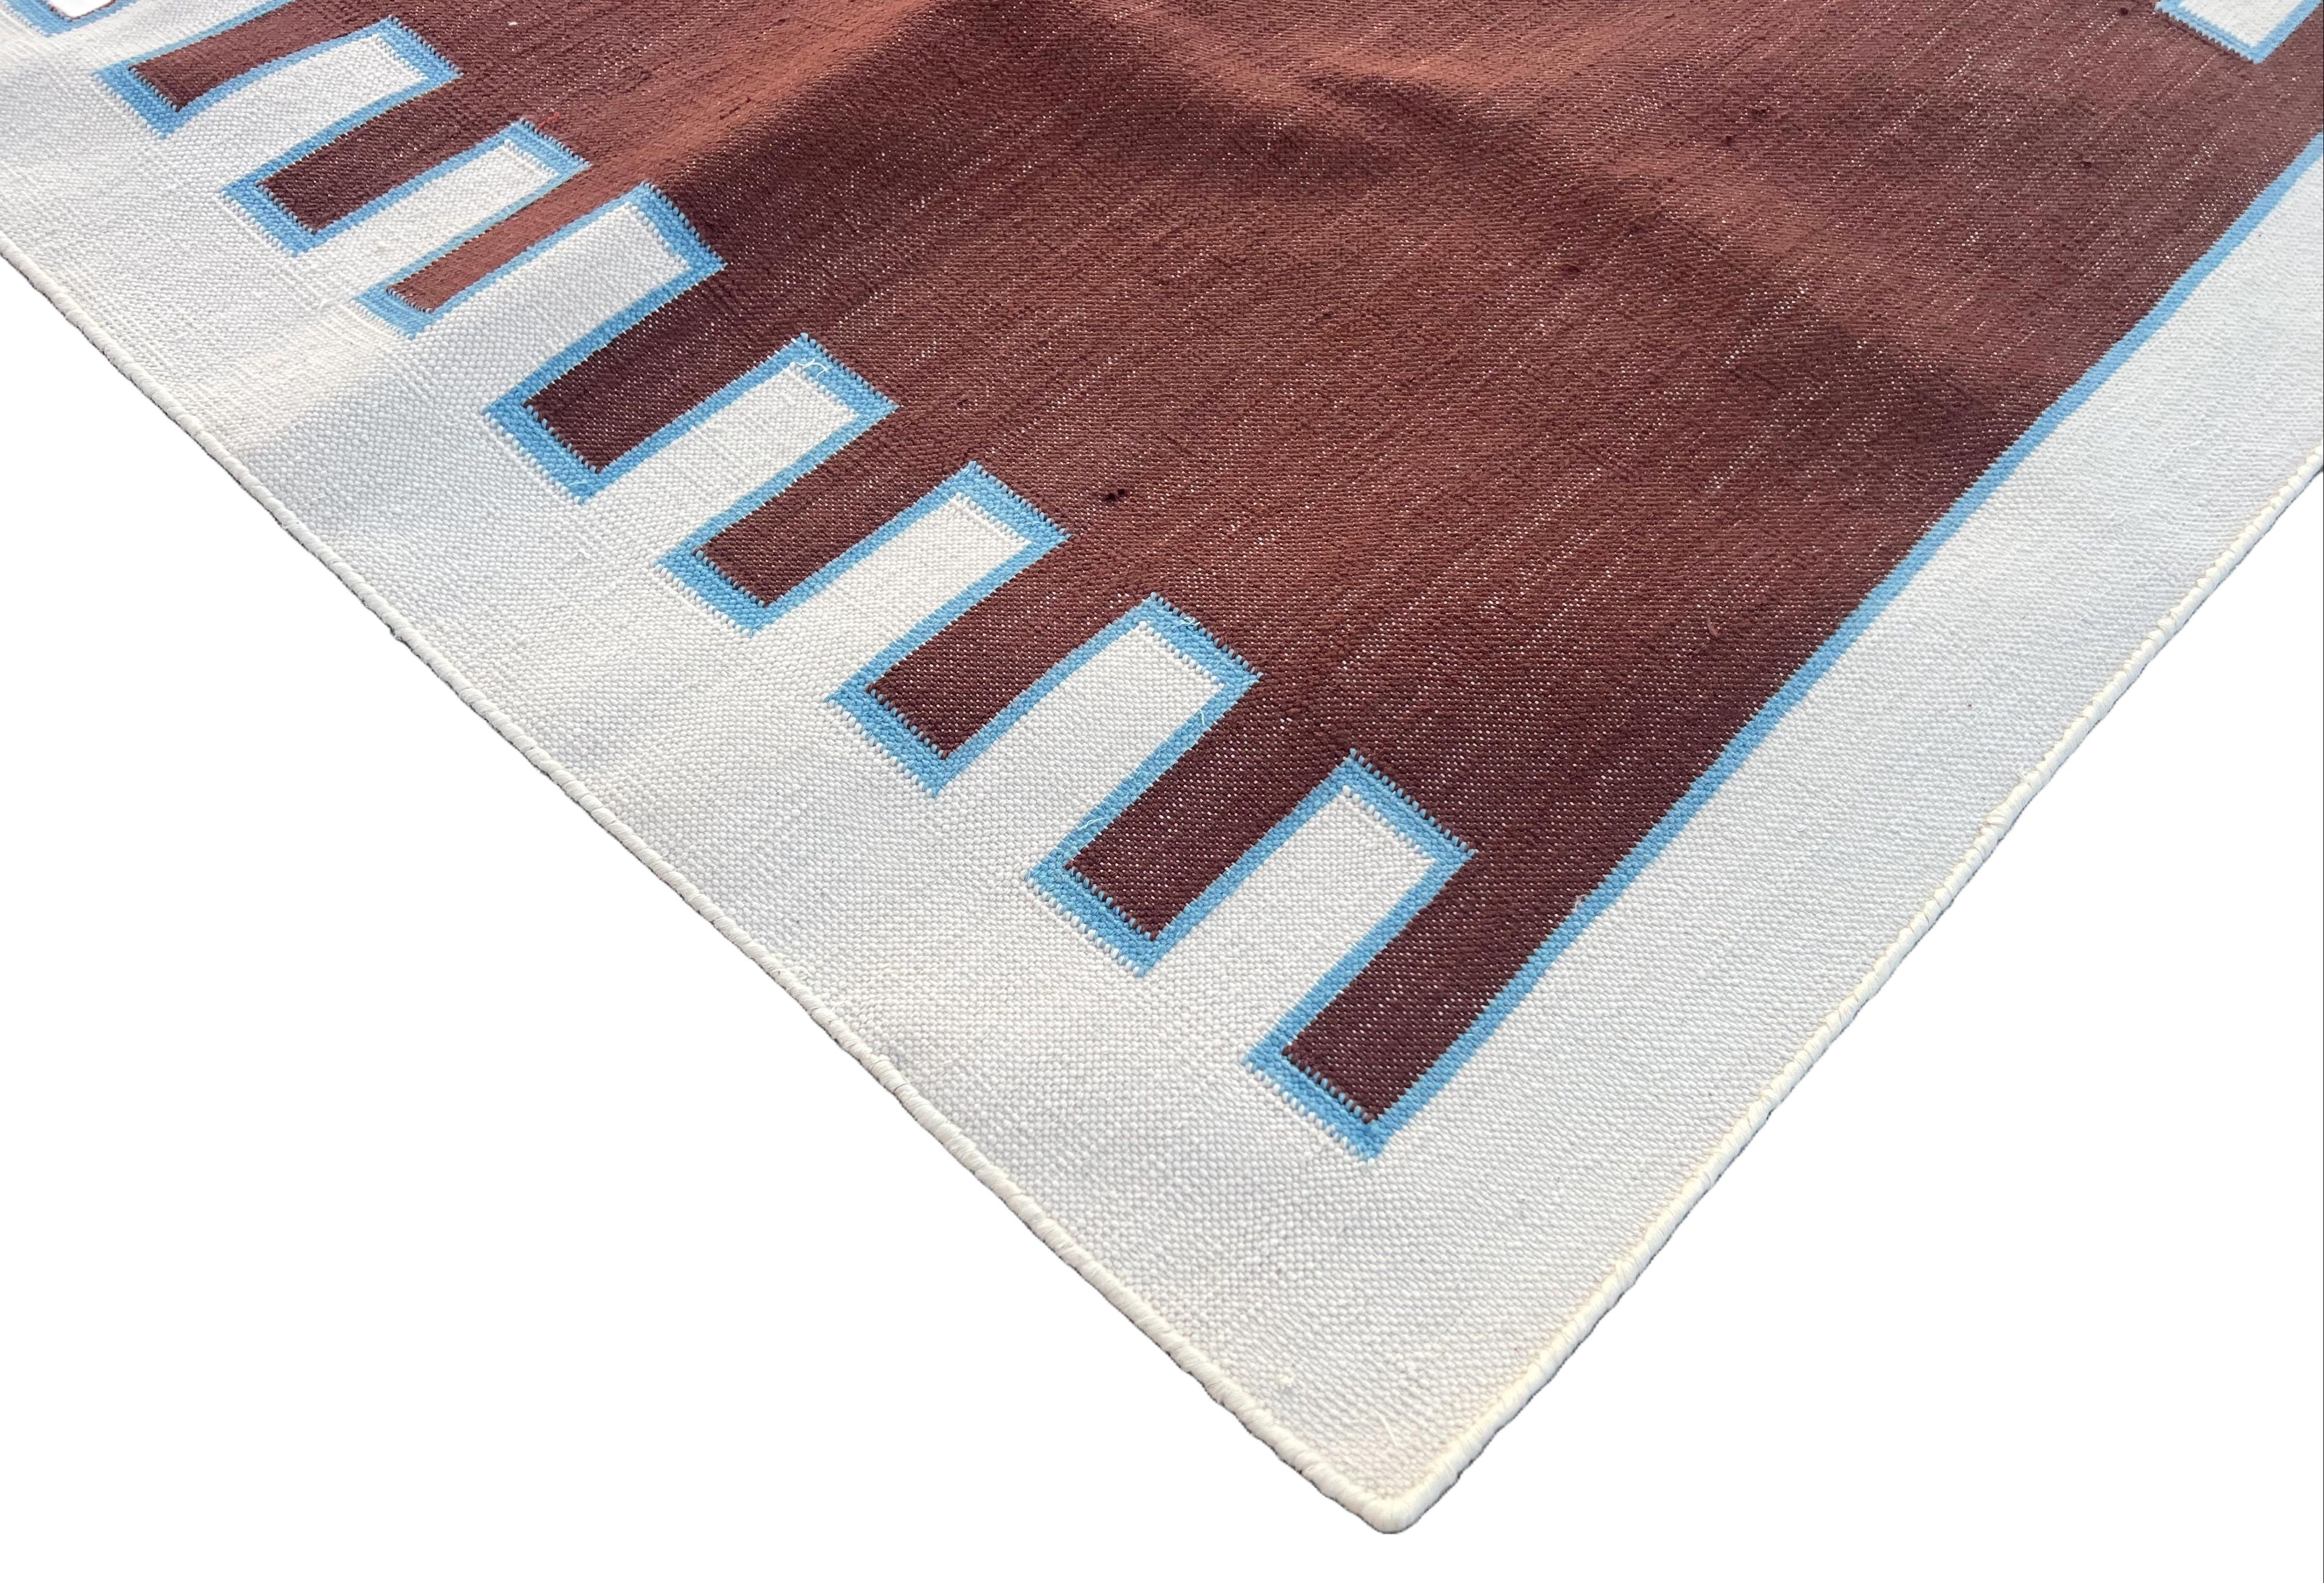 Cotton Natural Vegetable Dyed, Wine Red, Sky Blue And Cream Striped Indian Dhurrie Runner-2.5'x6'
These special flat-weave dhurries are hand-woven with 15 ply 100% cotton yarn. Due to the special manufacturing techniques used to create our rugs, the